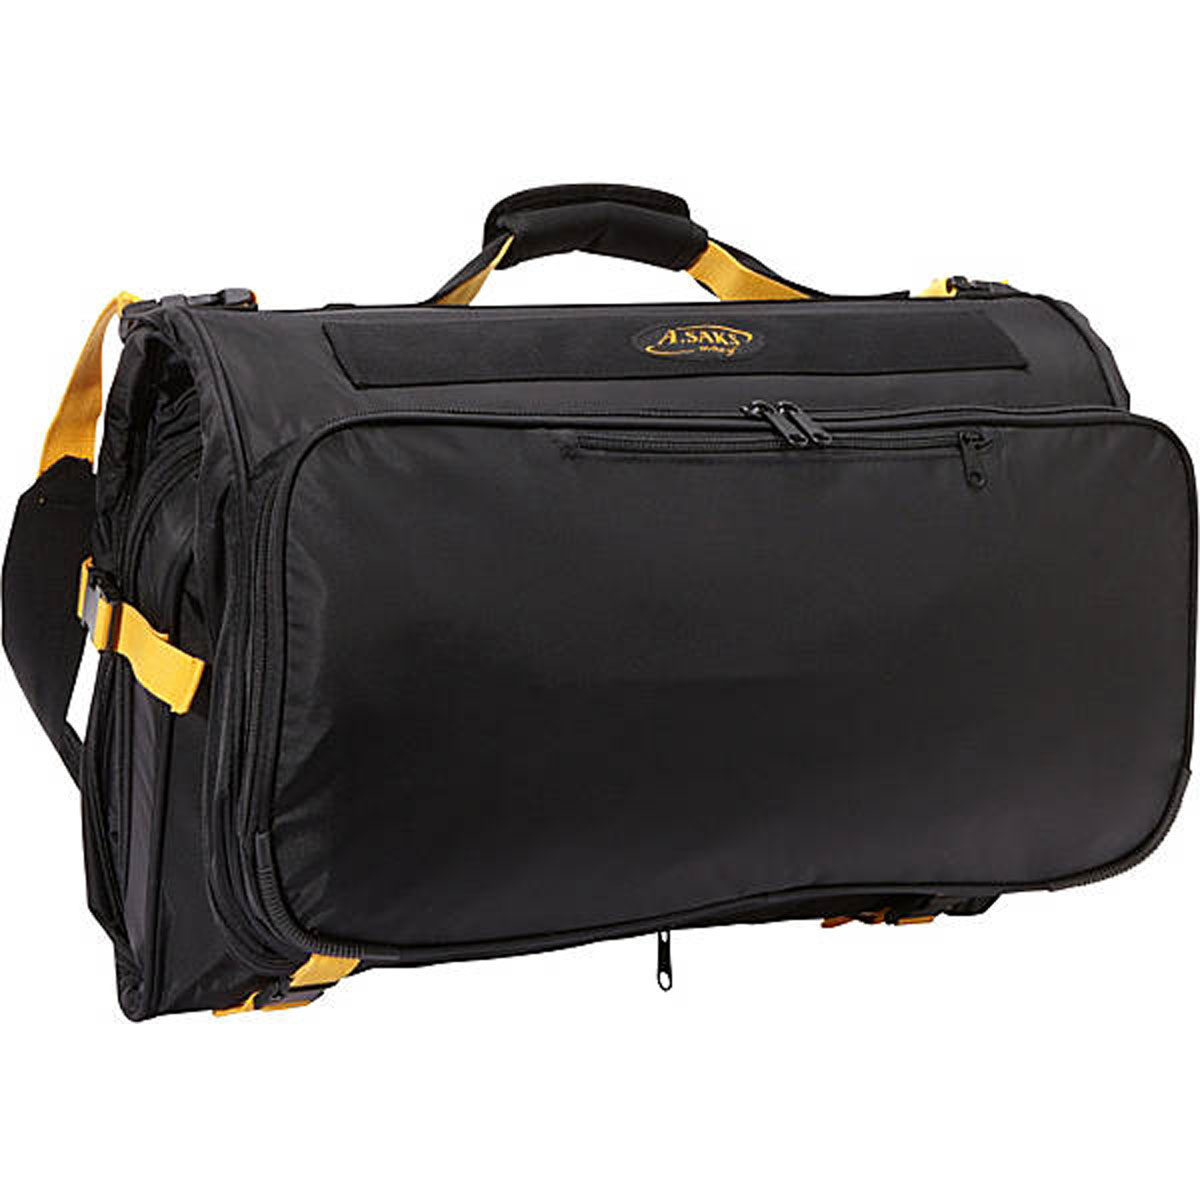 Picture of A. Saks AE-45 Tri- Fold Carry-On Garment Bag